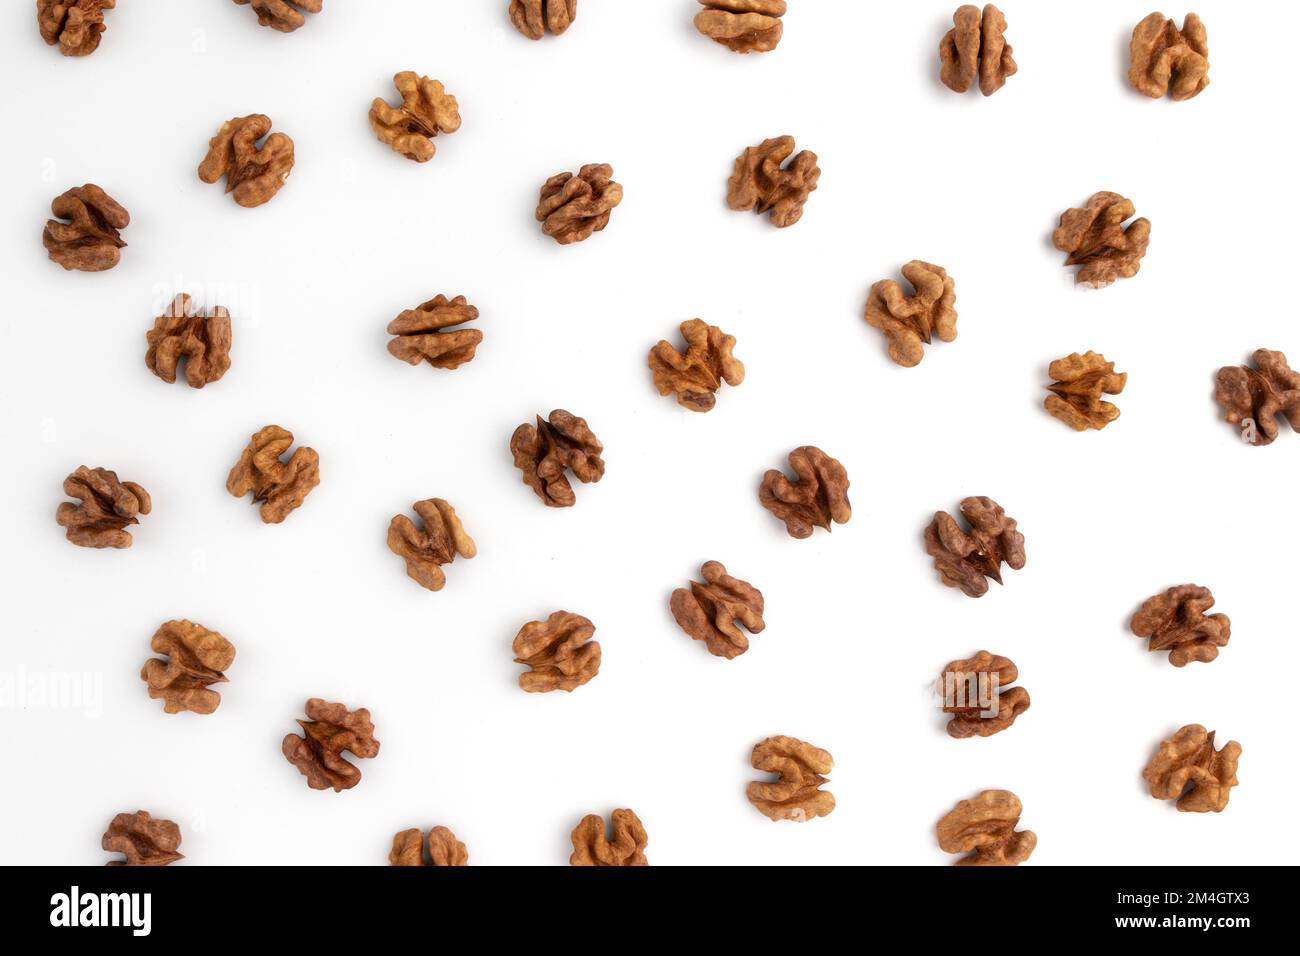 halves of walnuts isolated on white background, pattern top view, snack food concept, vegan meal Stock Photo